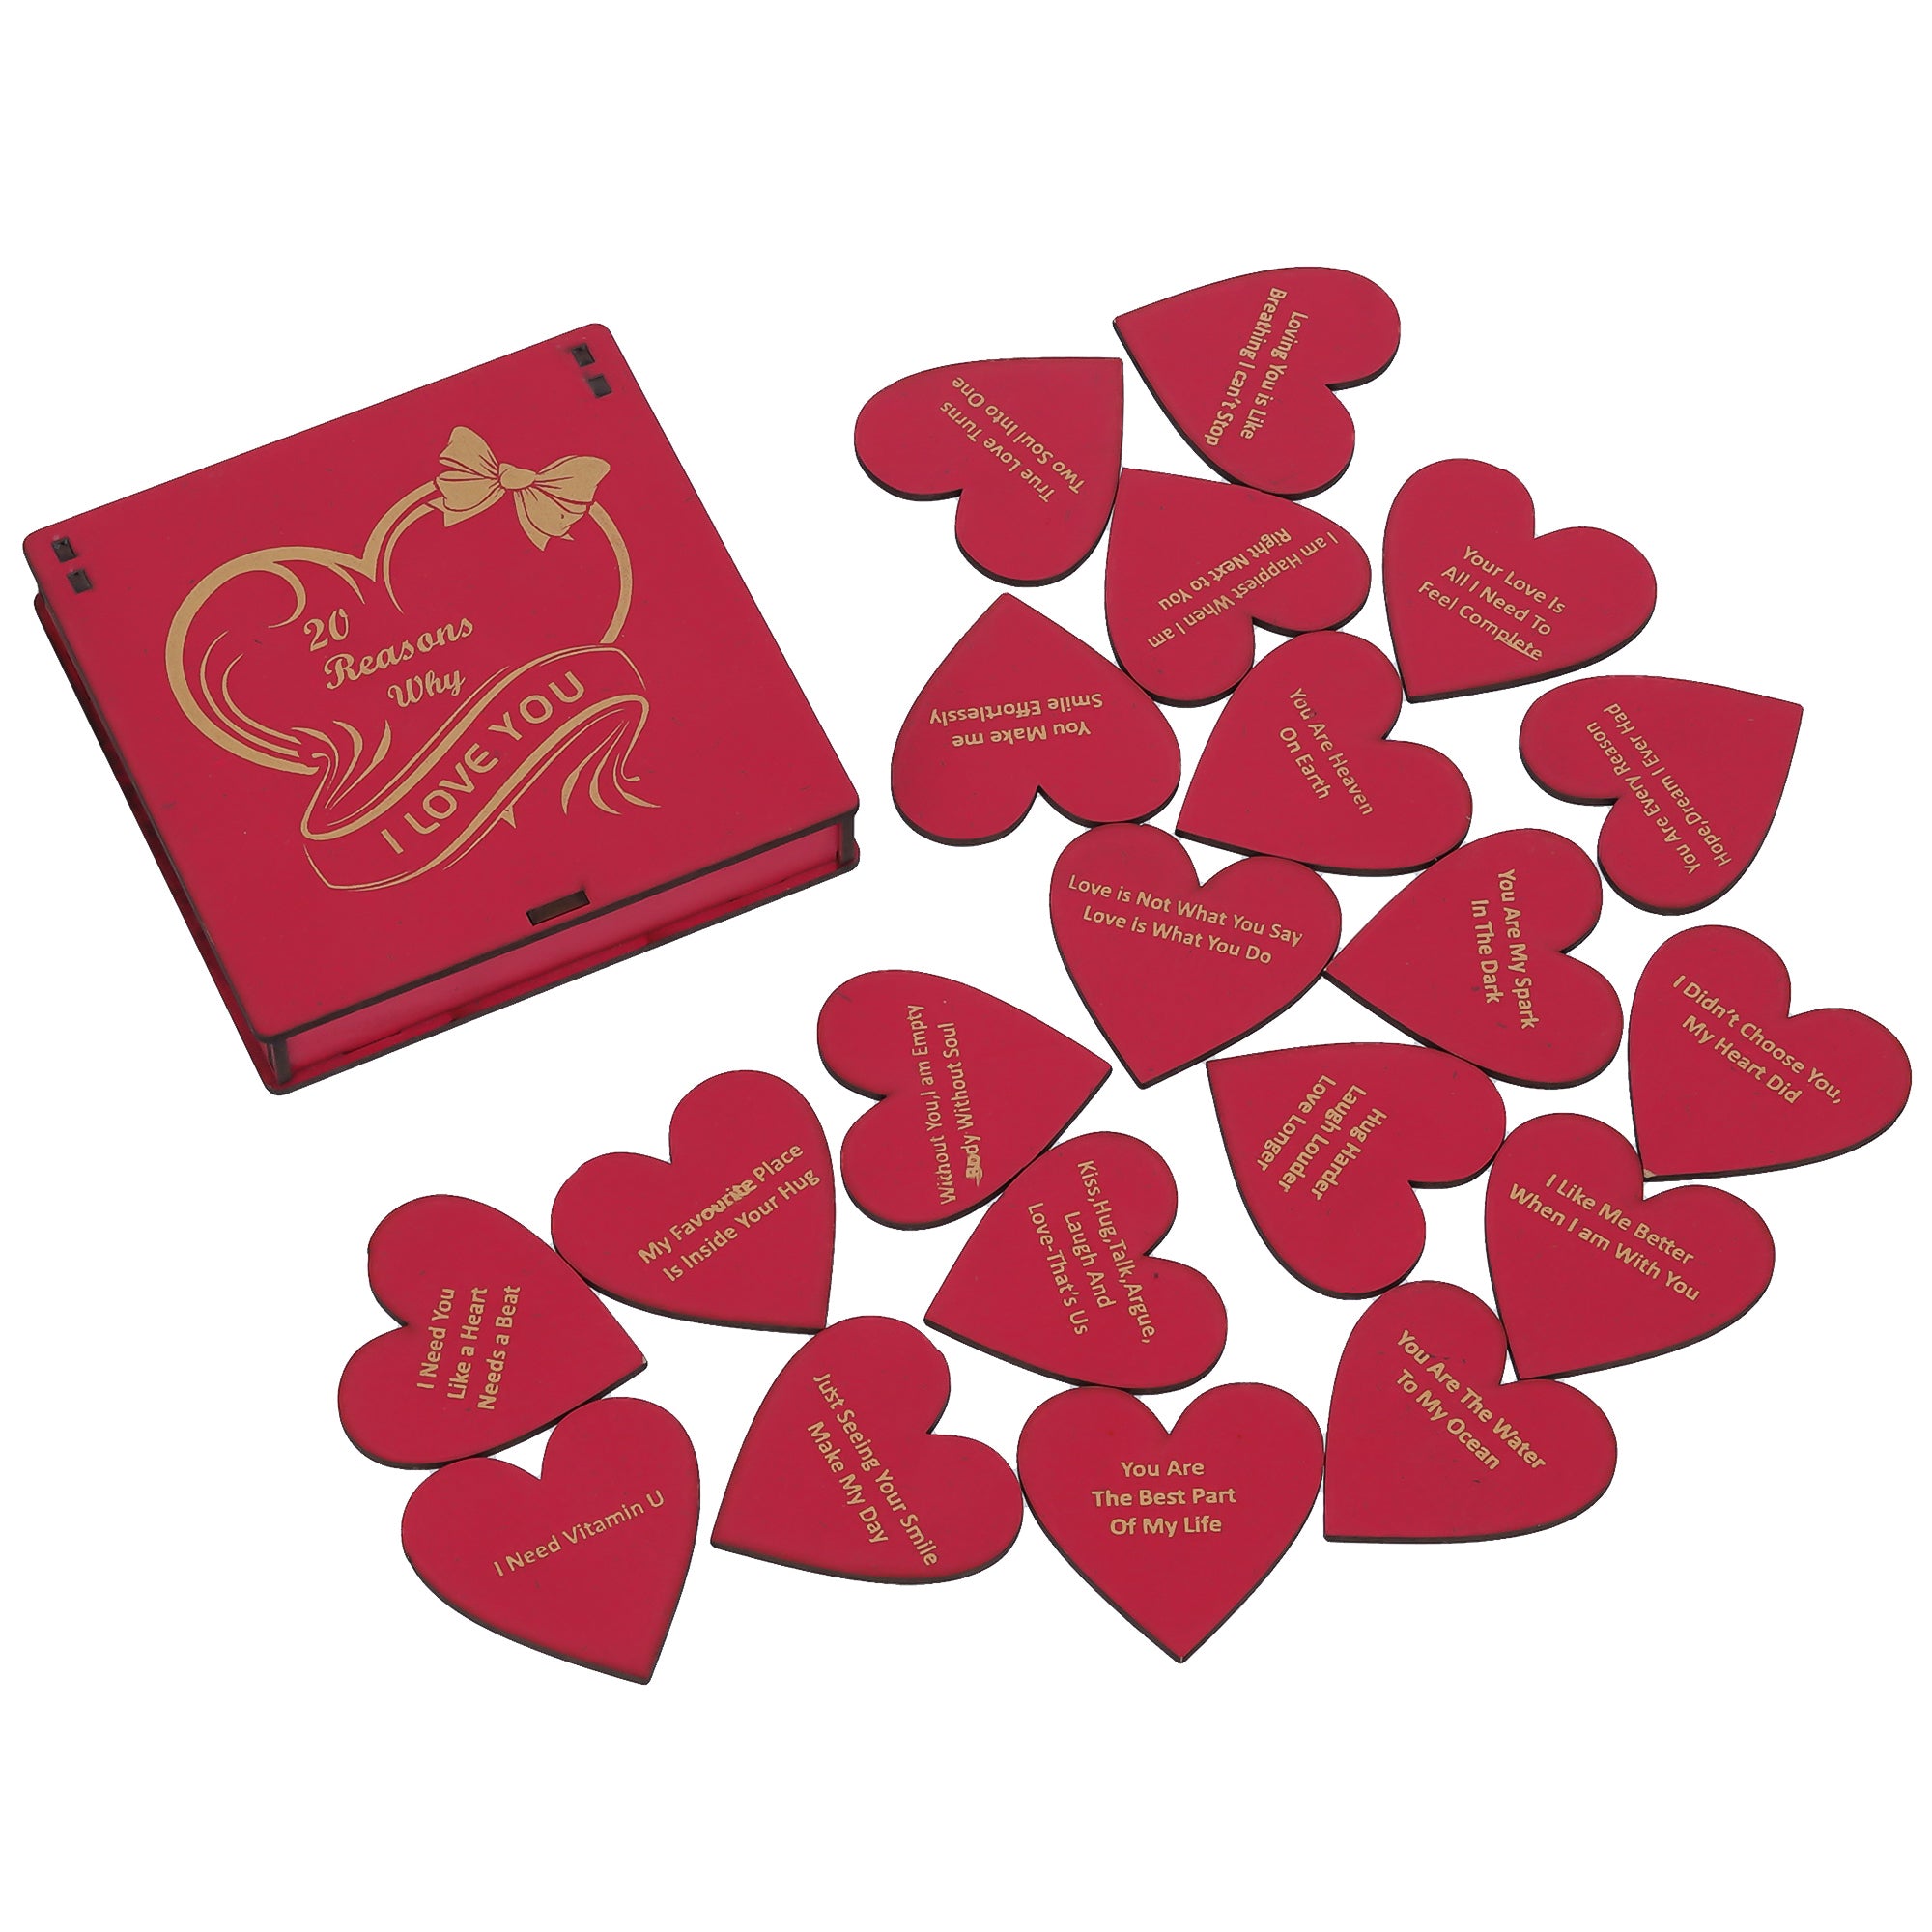 "20 Reasons Why I Love You" Printed on Little Red Hearts Decorative Valentine Wooden Gift Set Box 6